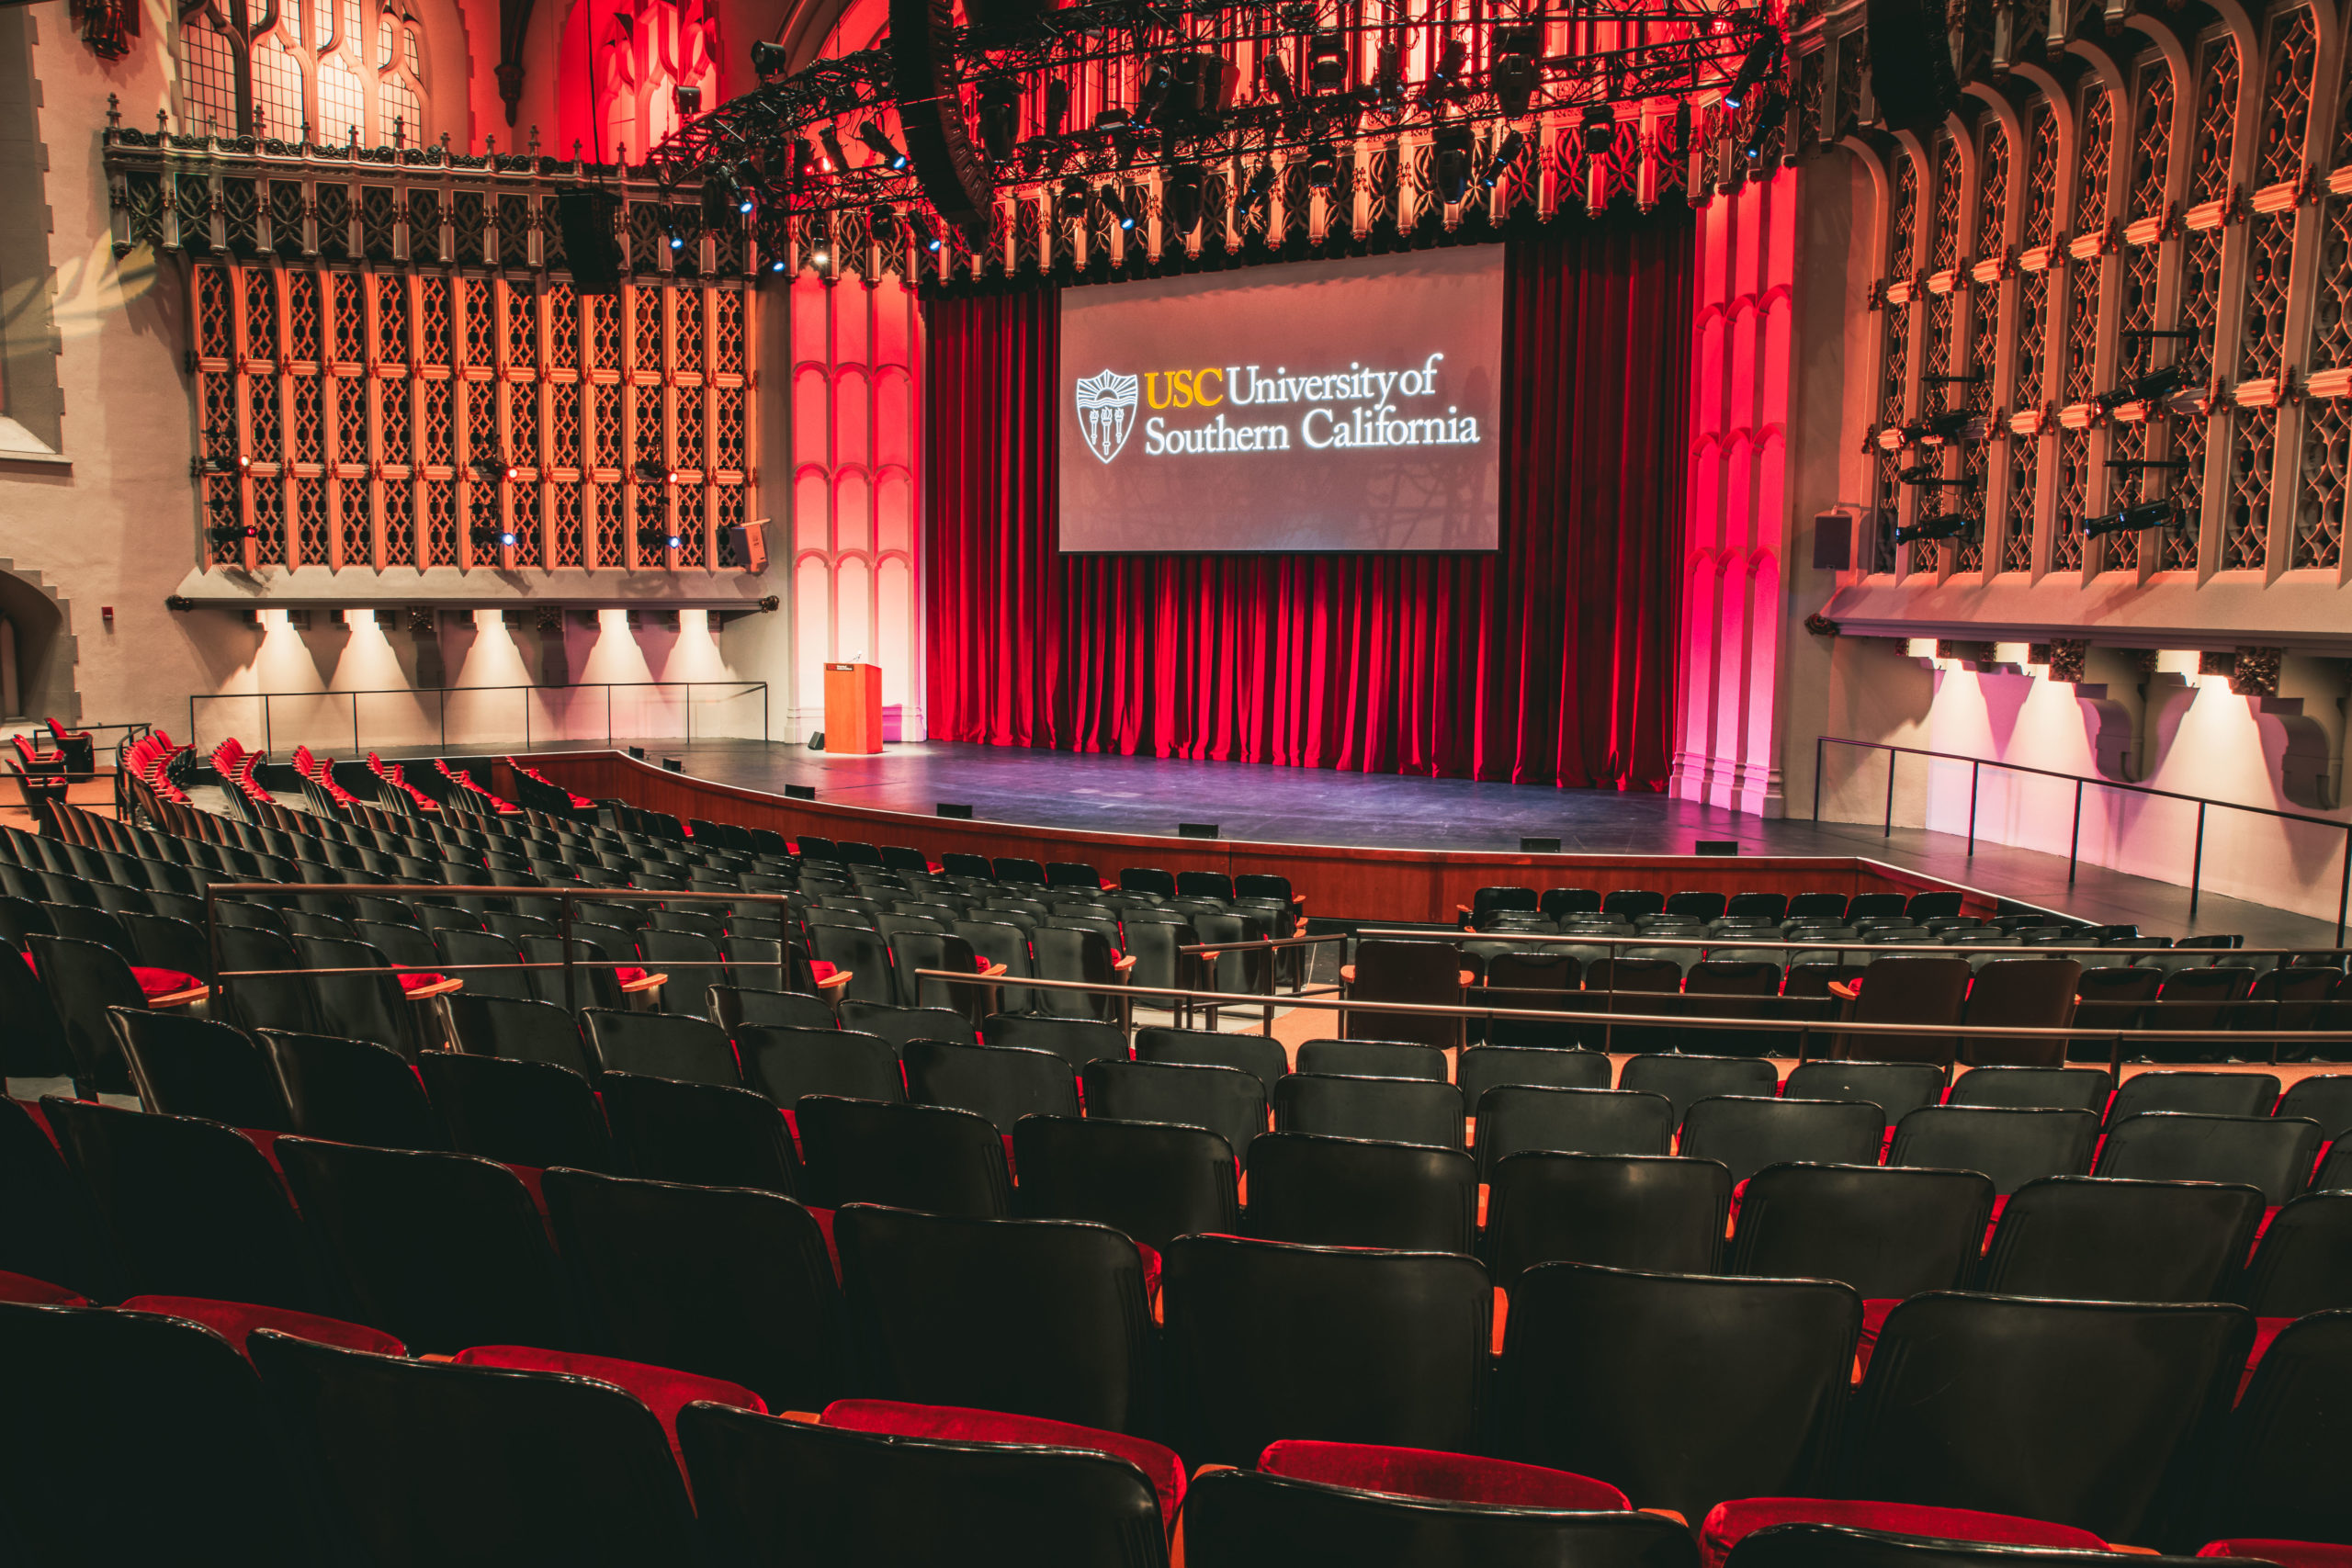 Stage view of Bovard Auditorium